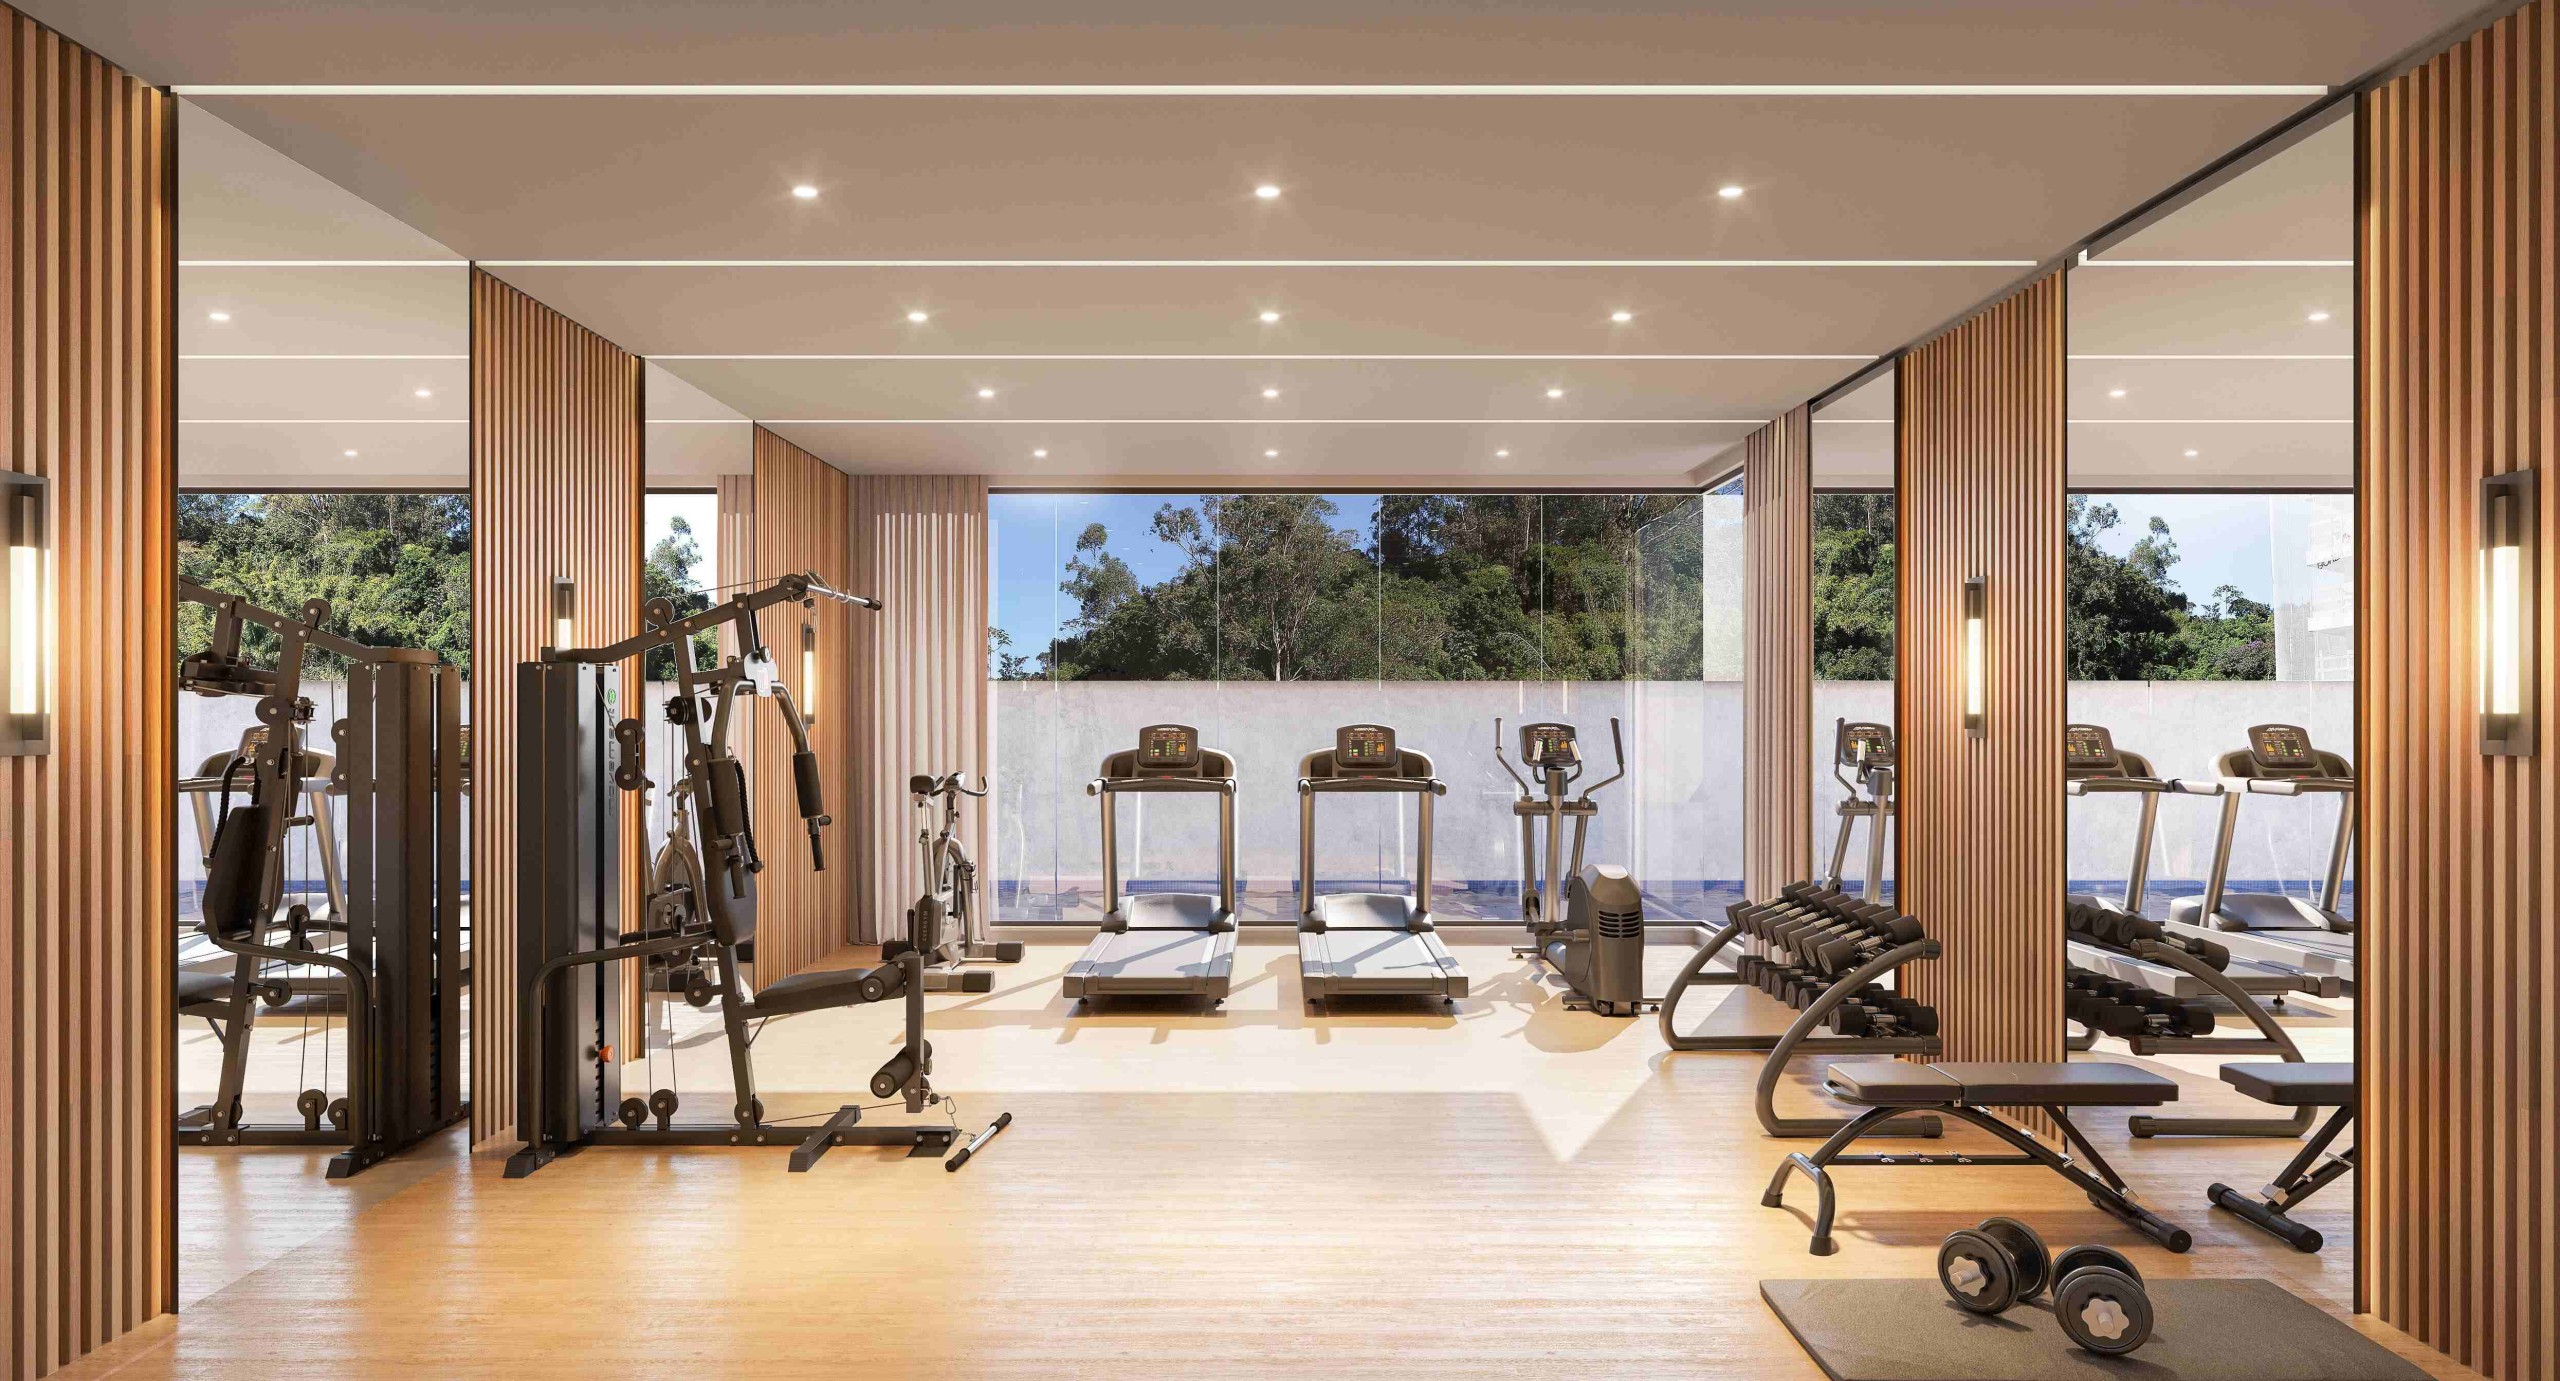 9 Tips For Crafting the Ultimate Luxury Home Gym